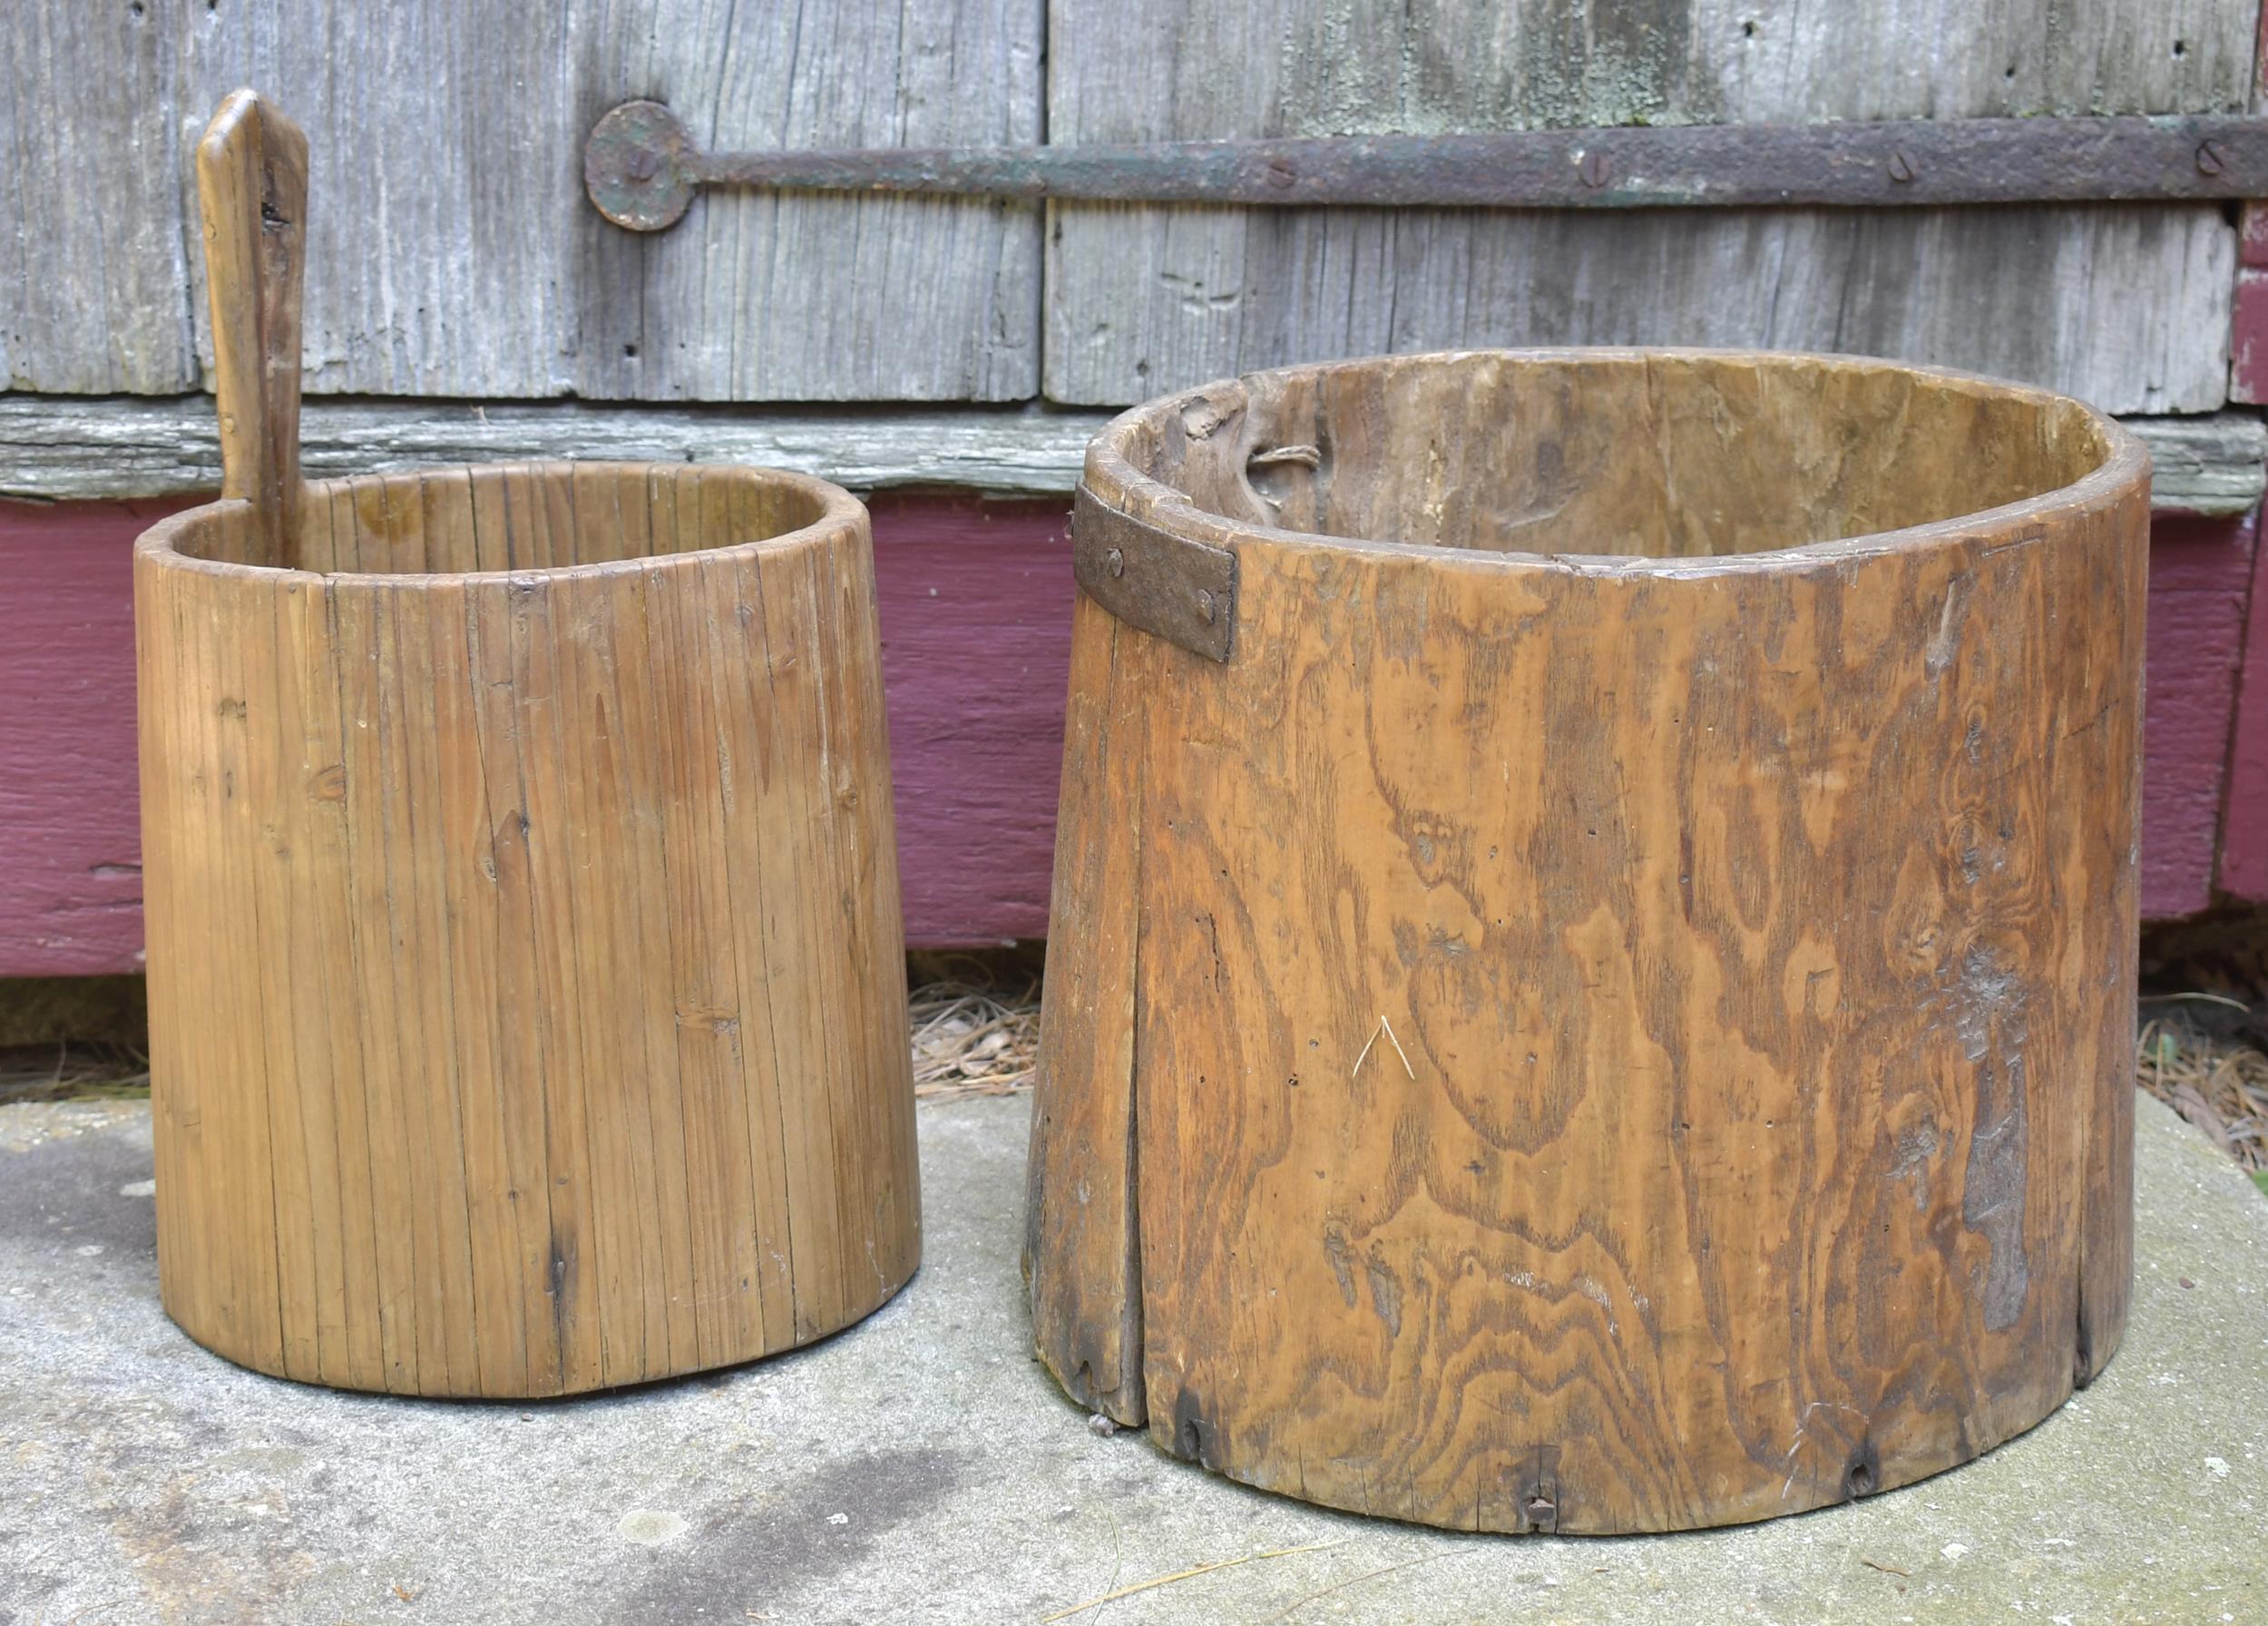 TWO EARLY WOOD BUCKETS 18th C  29e22f